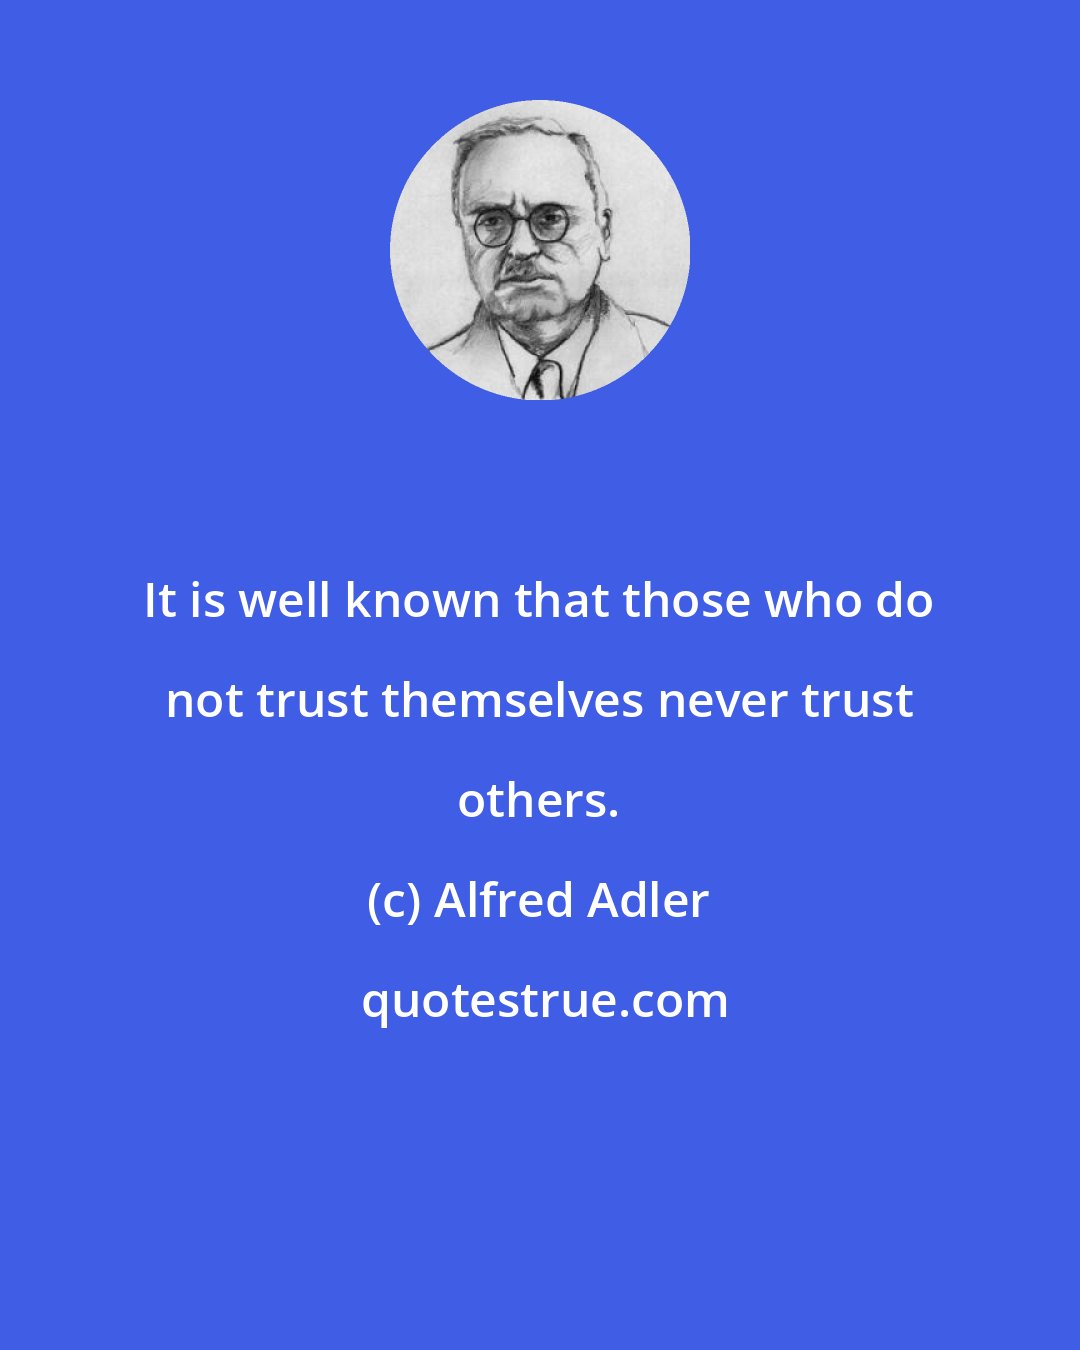 Alfred Adler: It is well known that those who do not trust themselves never trust others.